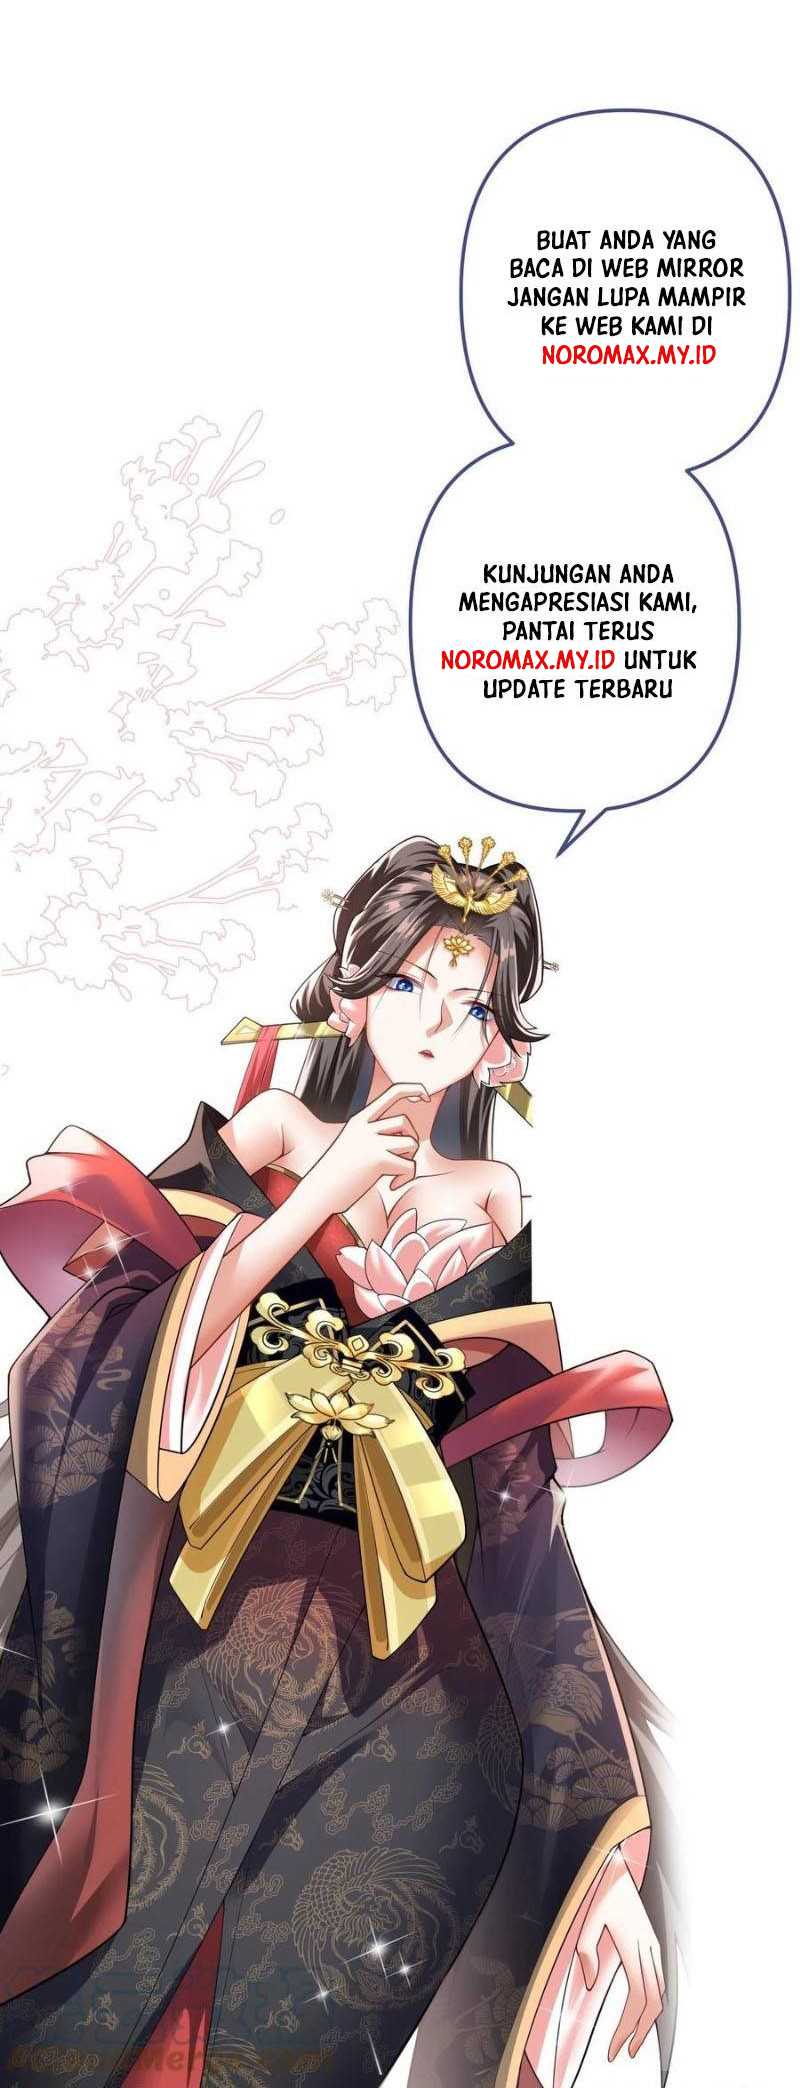 It’s Over! The Queen’s Soft Rice Husband is Actually Invincible Chapter 332